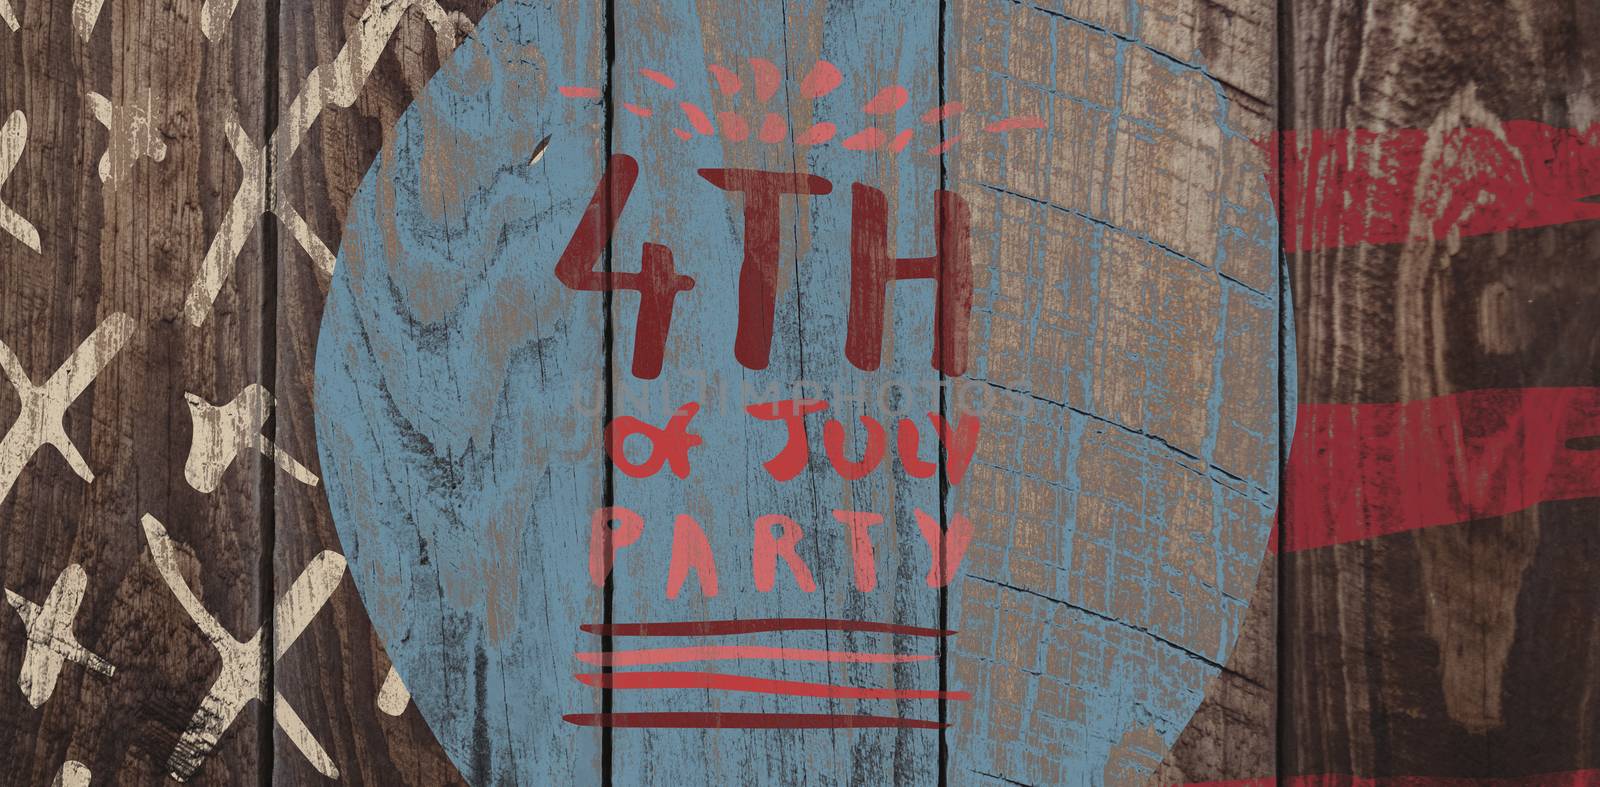 Digitally generated image of 4th of july party text against wood panelling